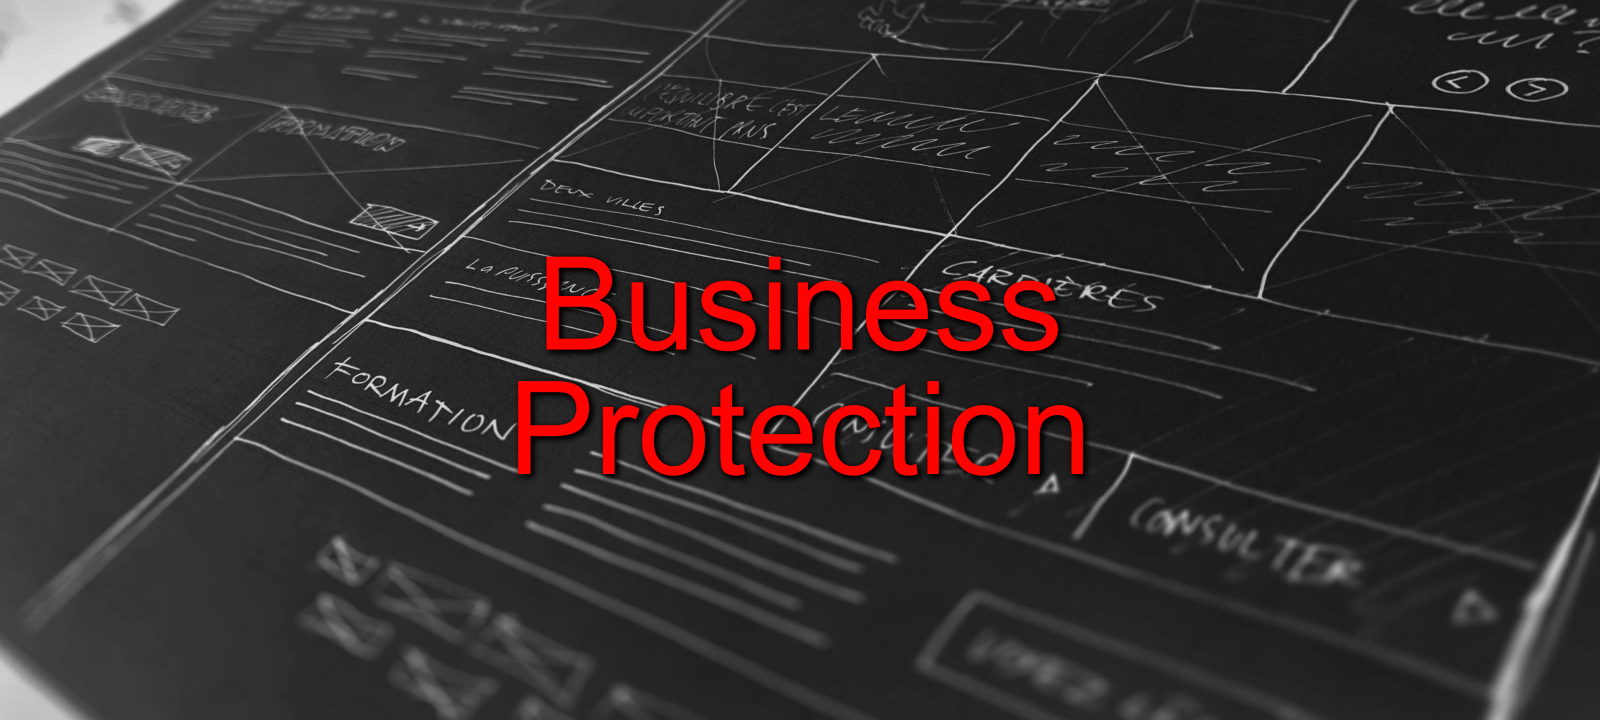 Business Protection